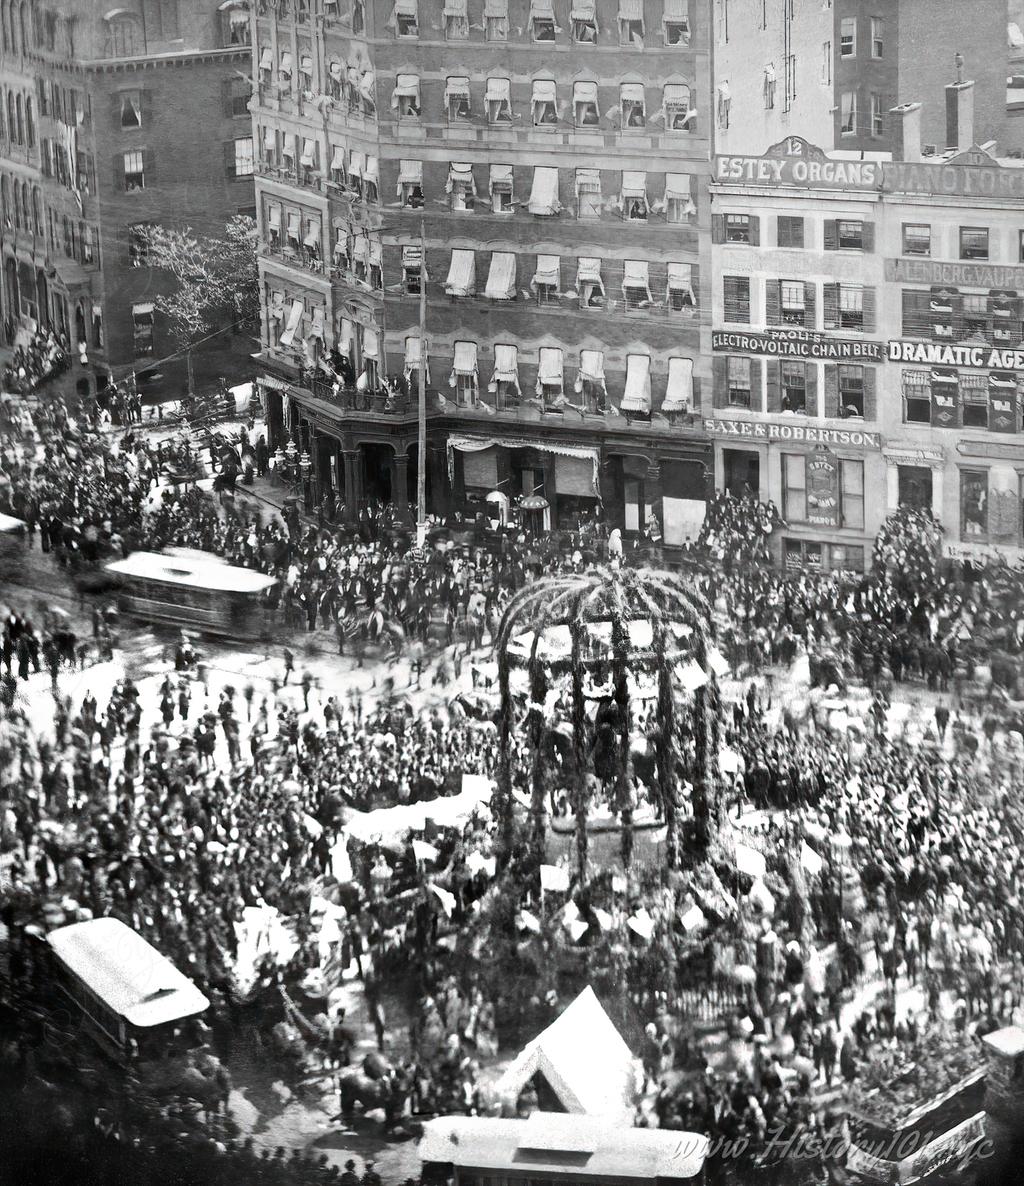 An elevated perspective of the Washington Statue at Union Square, surrounded by crowds of people and decorated for Decoration Day.